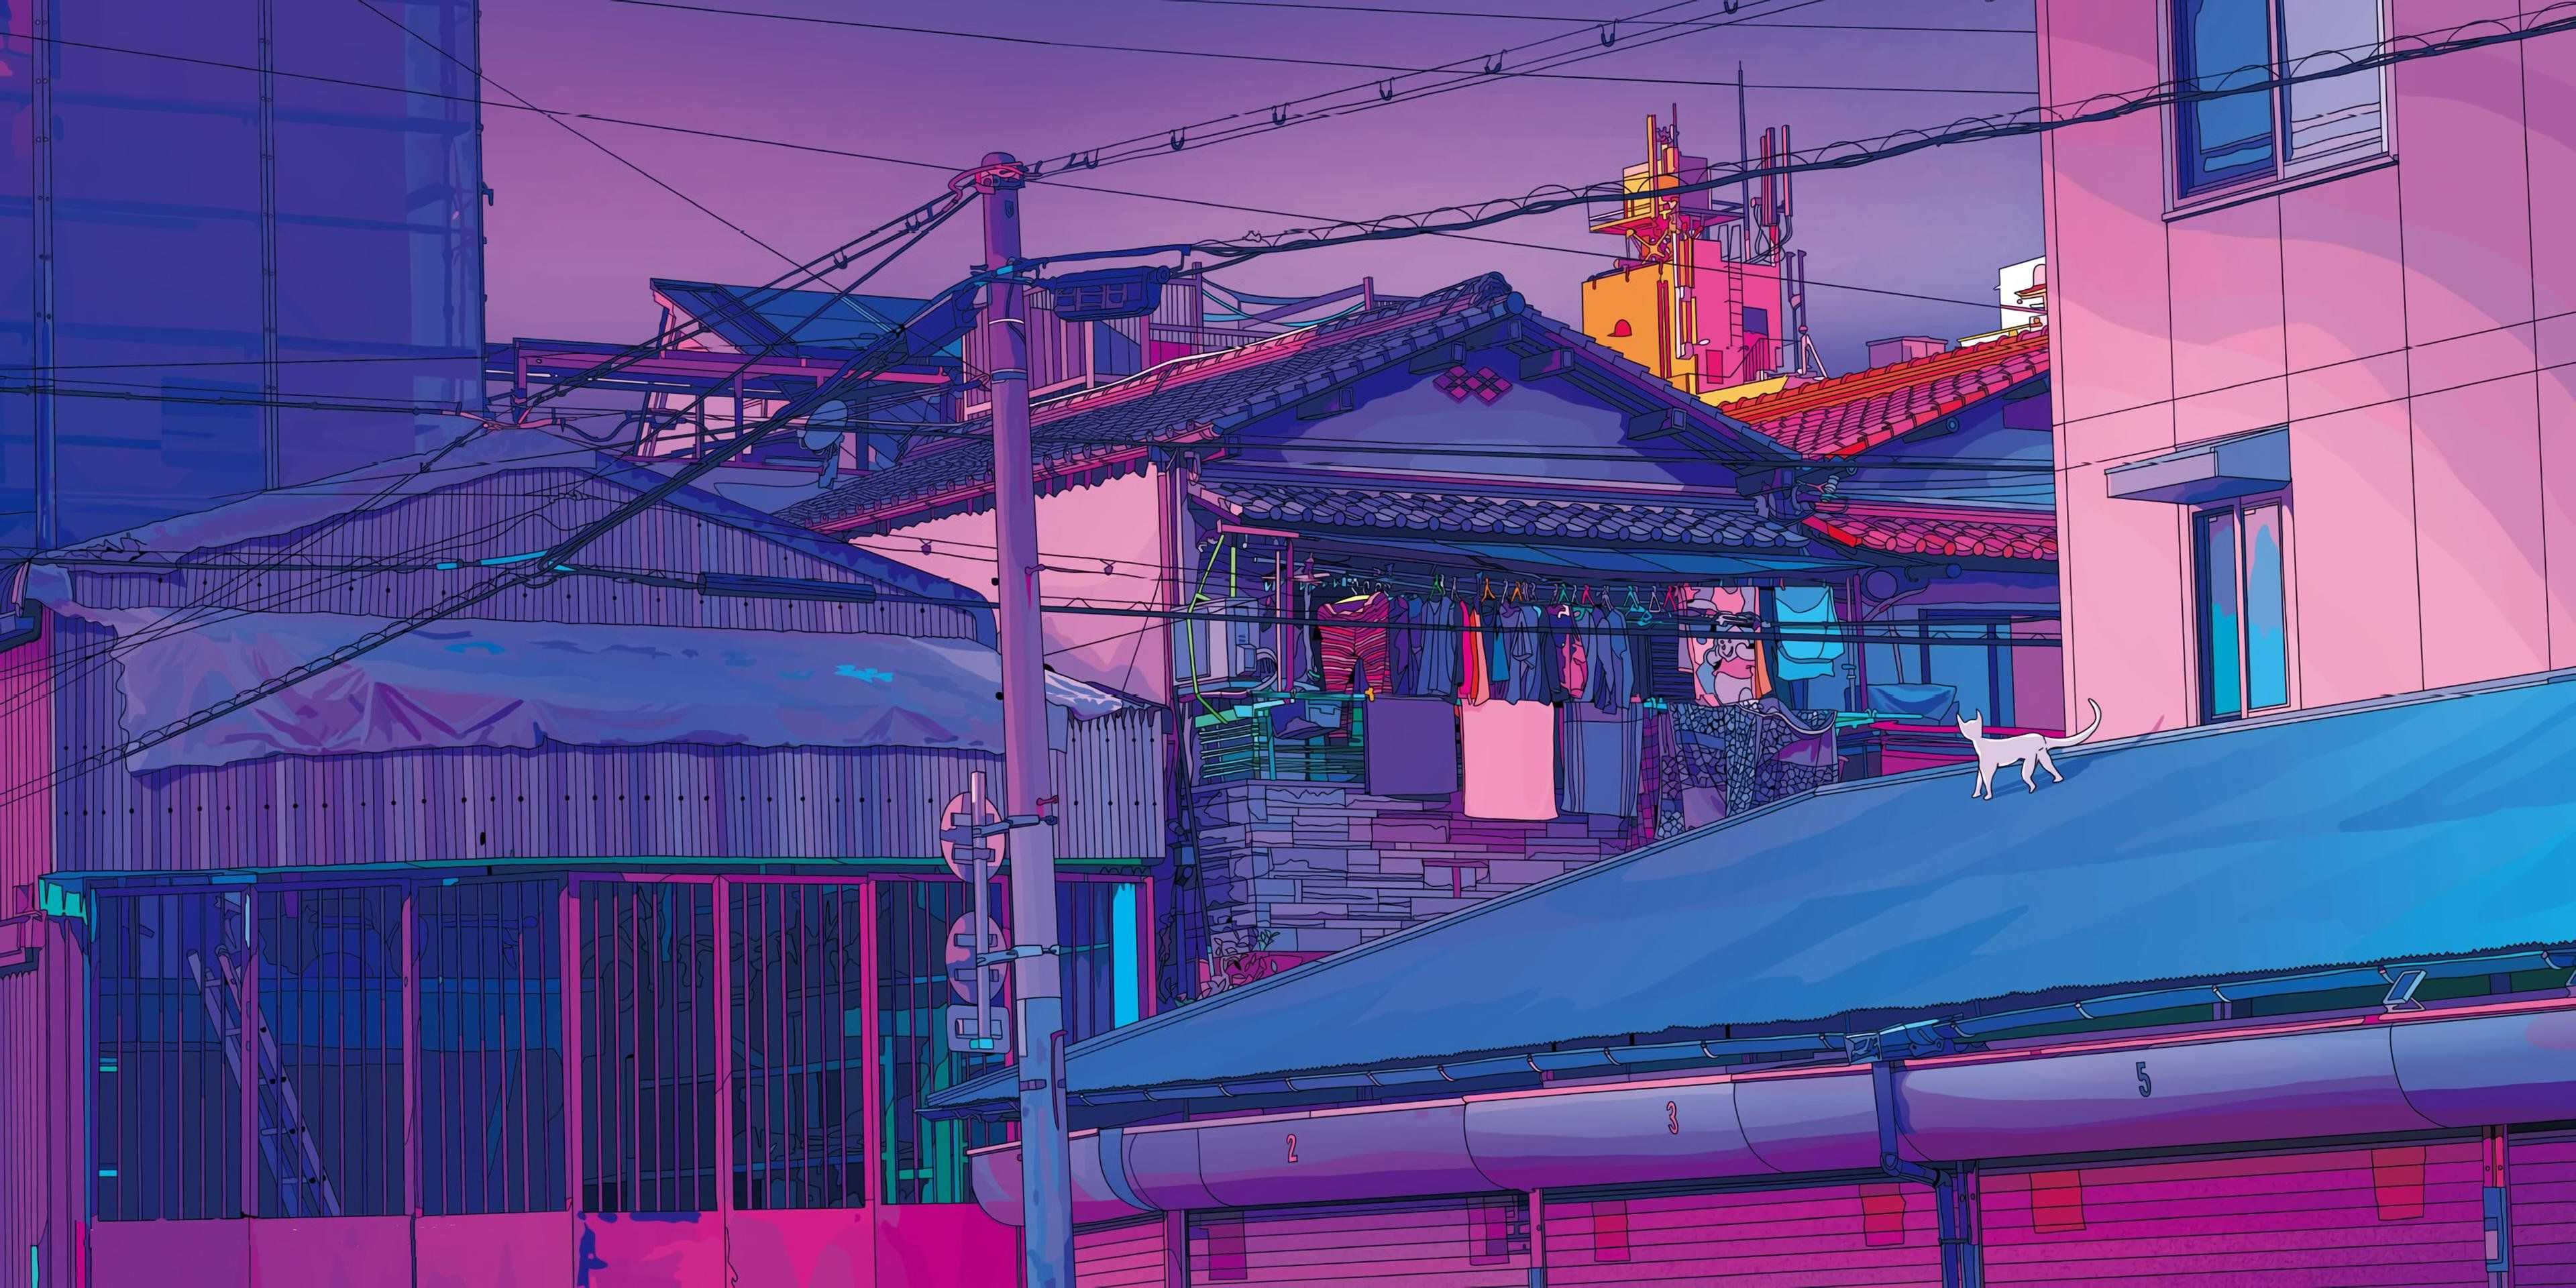 12 Lo Fi Anime Wallpapers for iPhone and Android by Patricia Stout